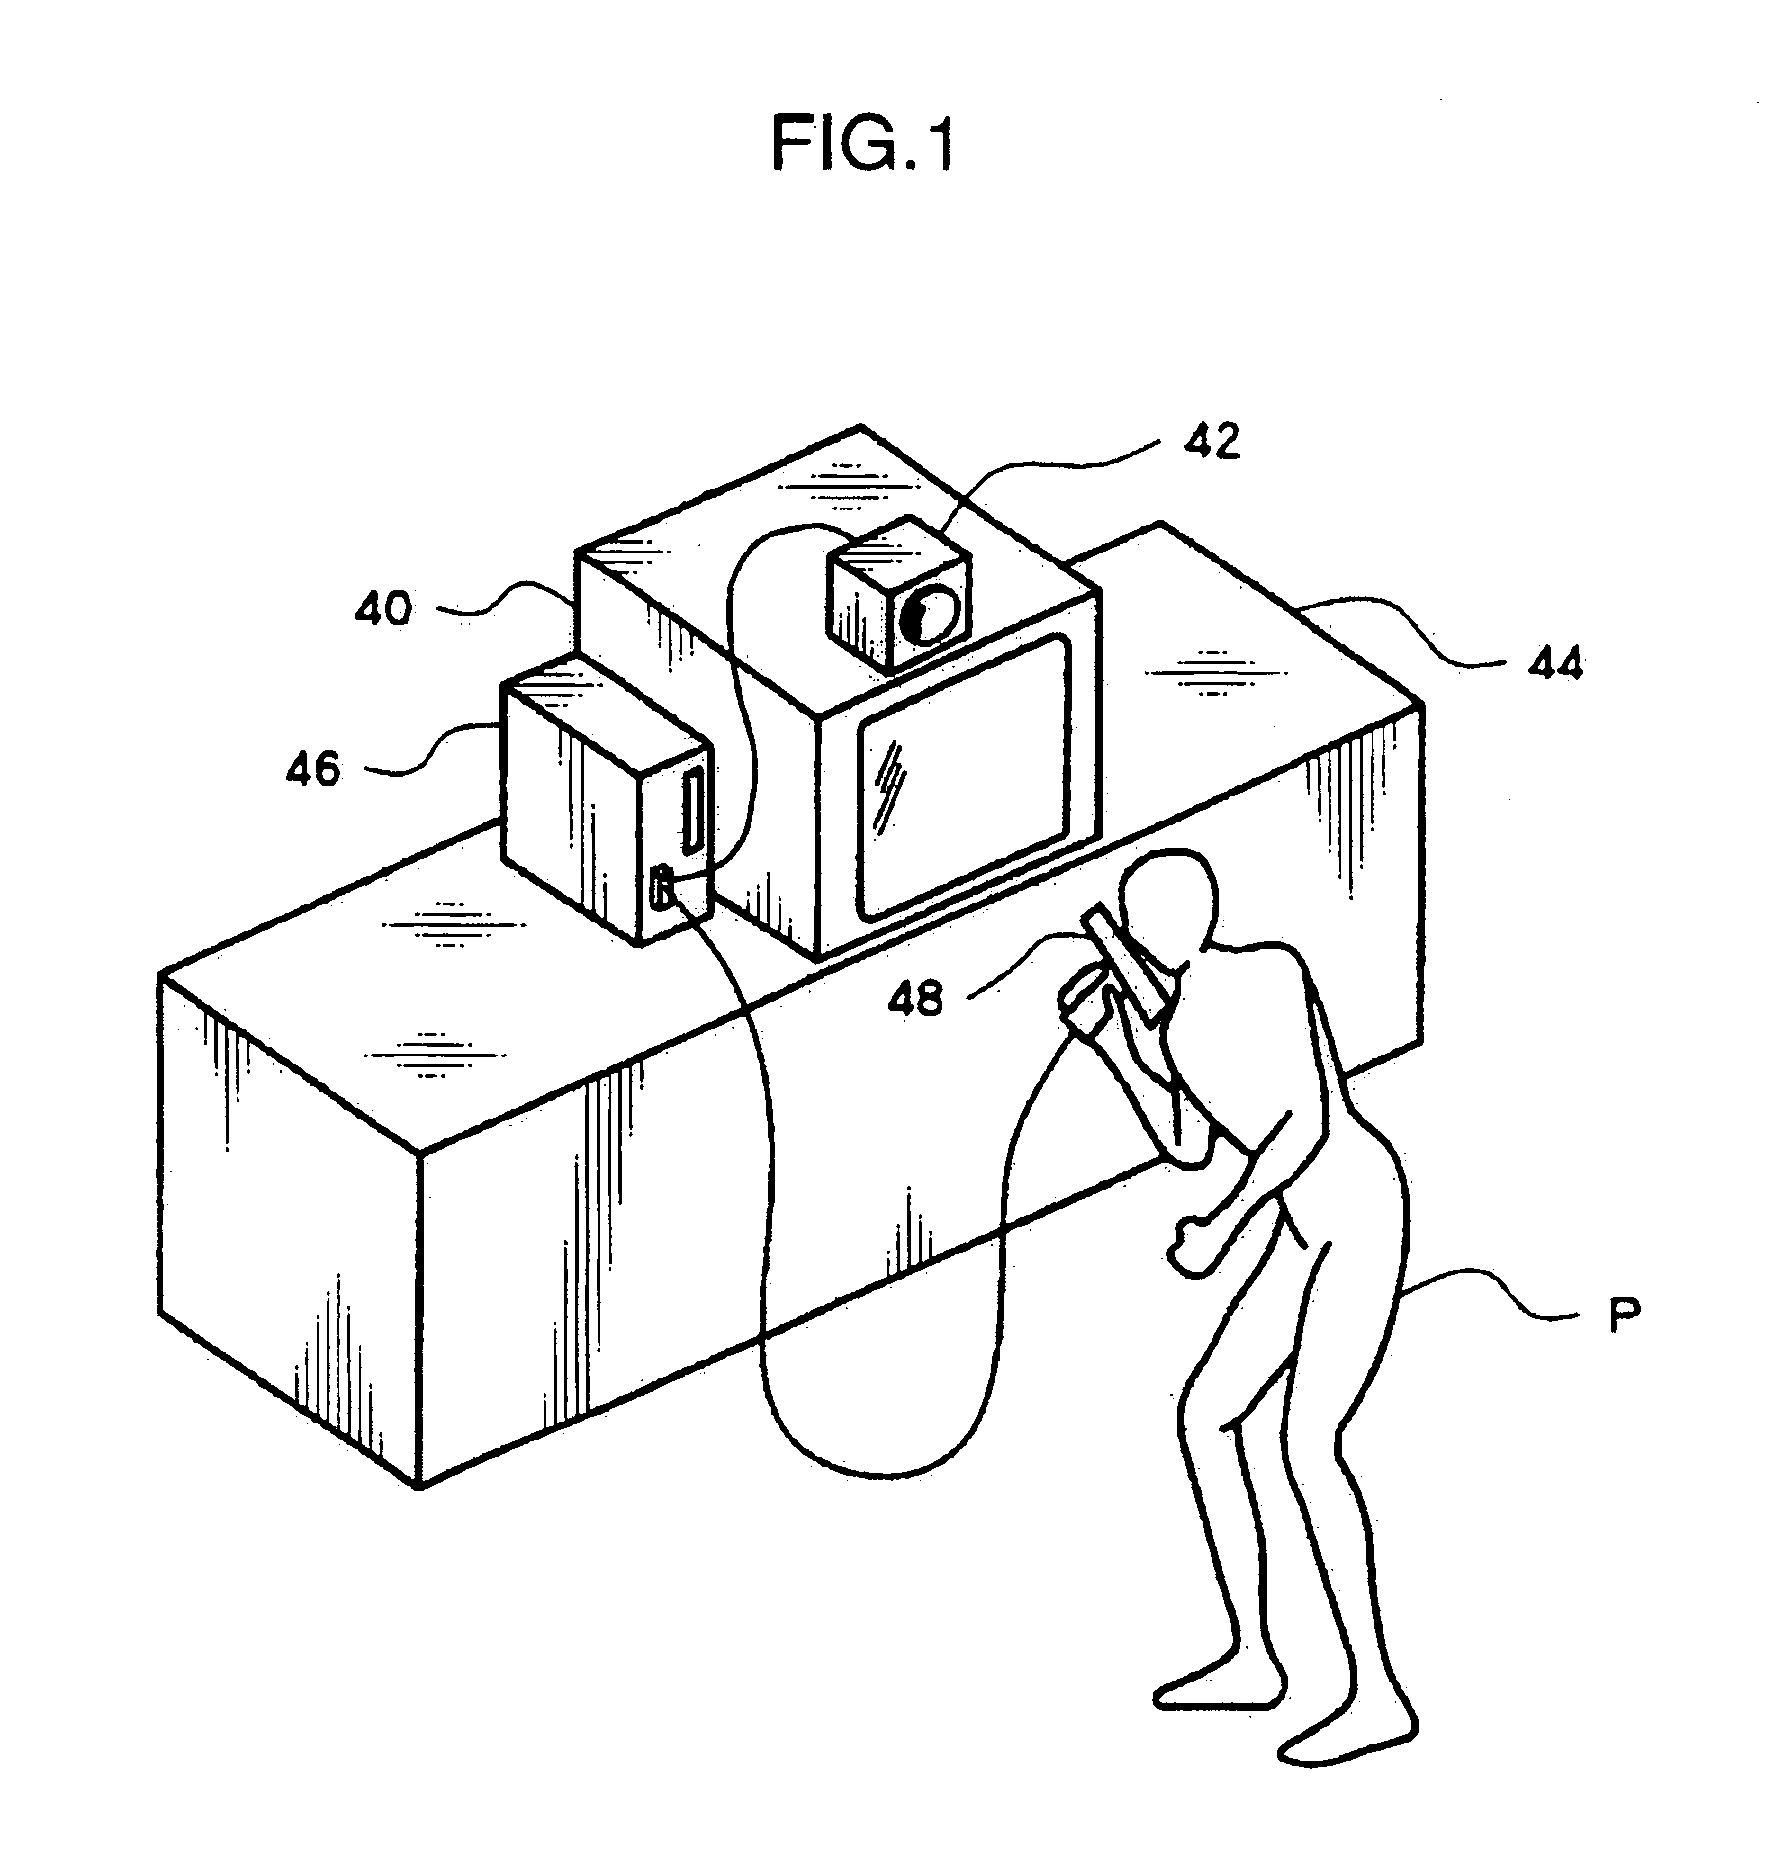 Video game apparatus, method and recording medium storing program for controlling viewpoint movement of simulated camera in video game